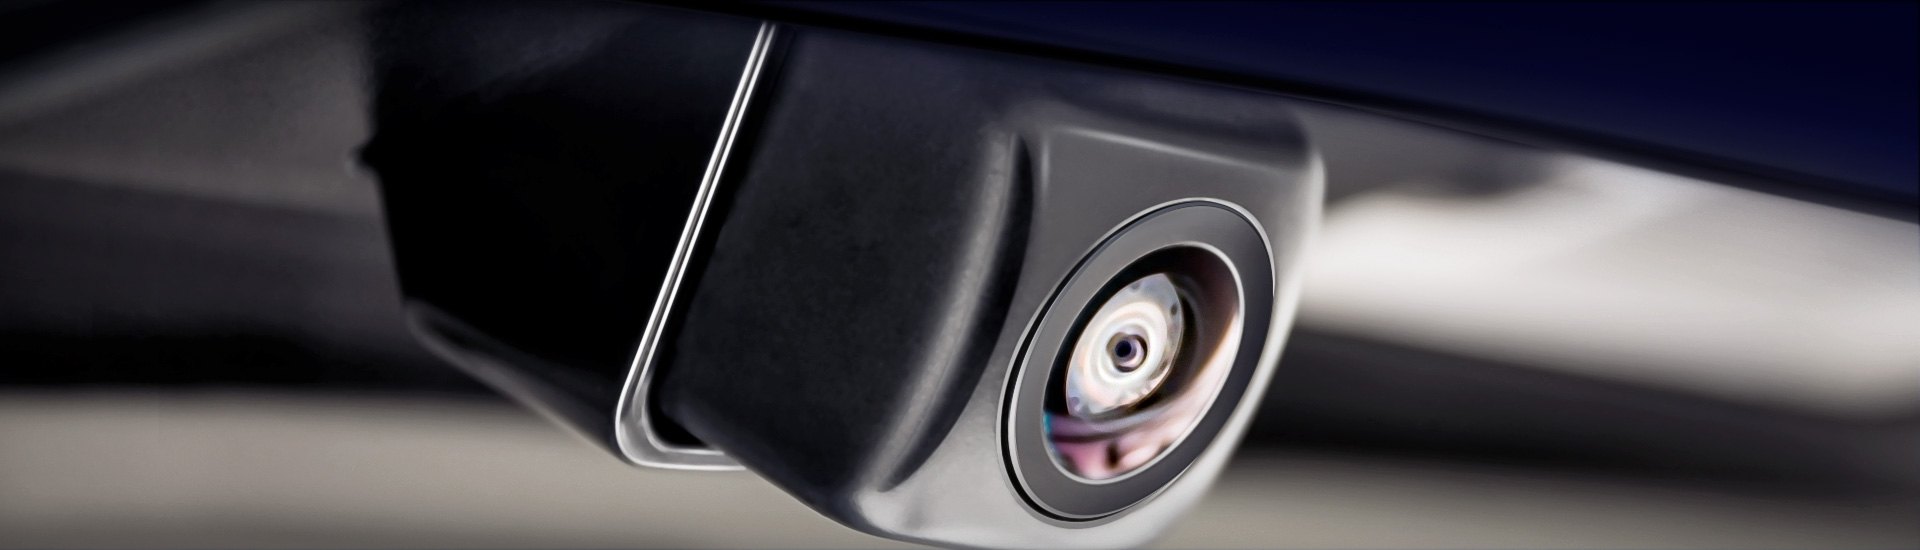 Backup Cameras For Semi Trucks | Safety & Convenience At A Reasonable Price